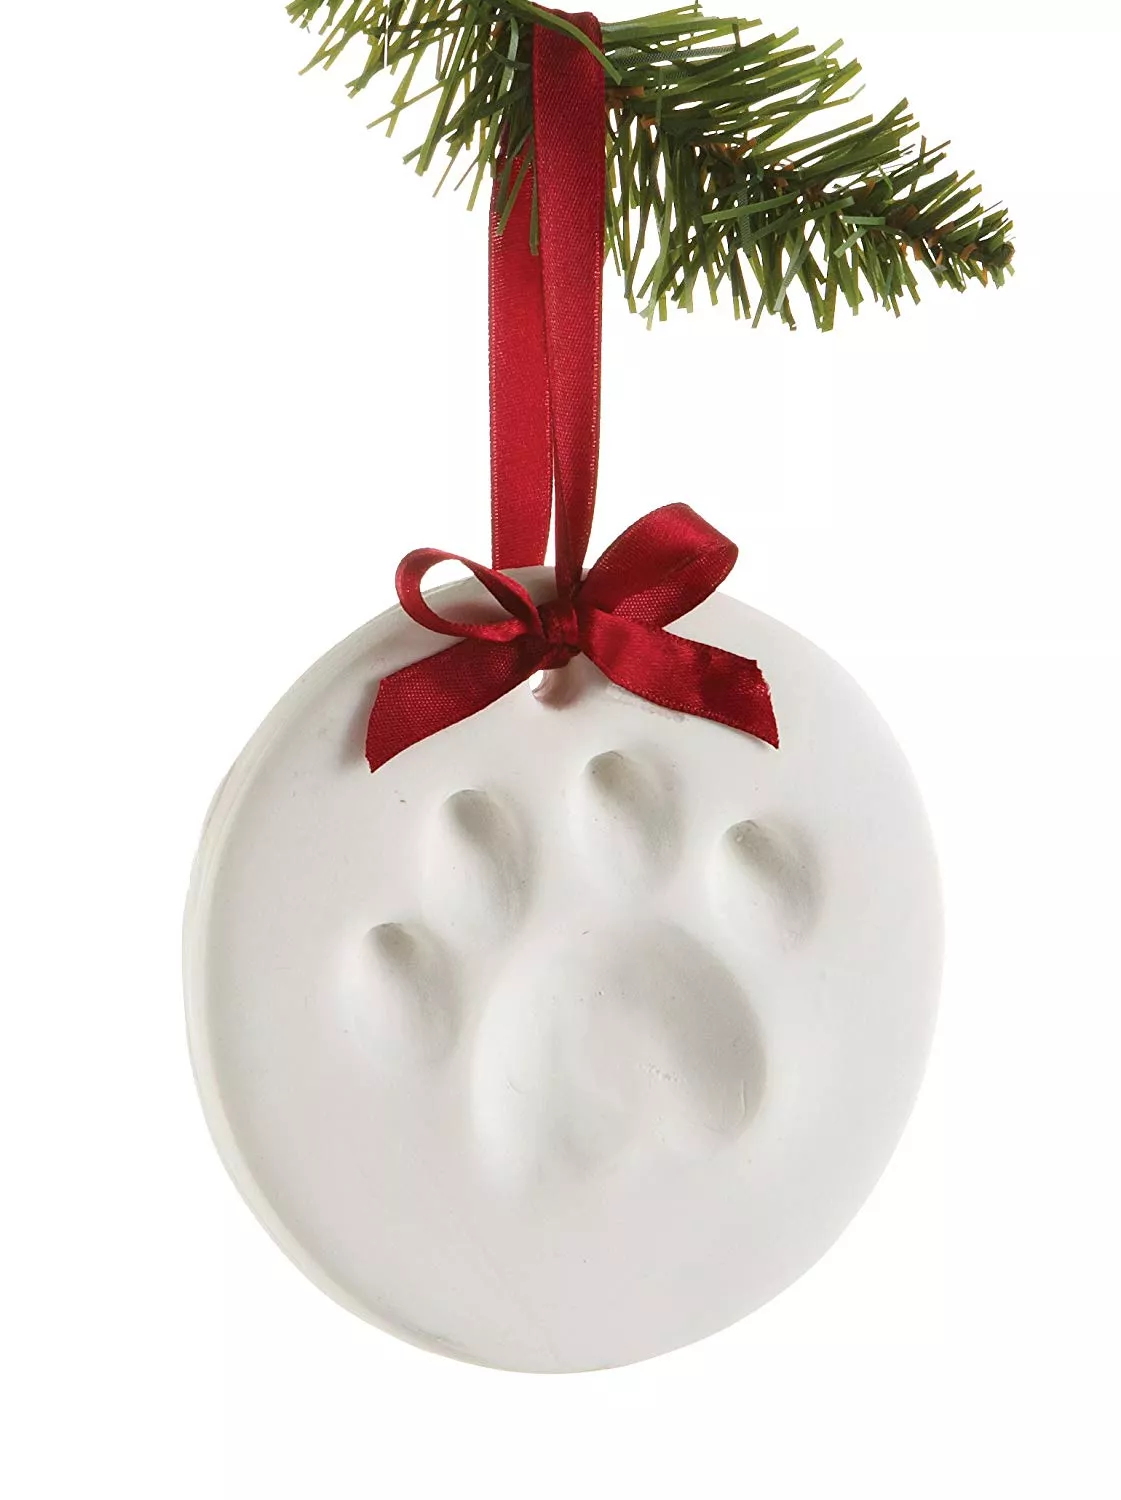 Best Gifts for Dog Lovers 2023: Christmas Ornament Doggy Paw Print 2023